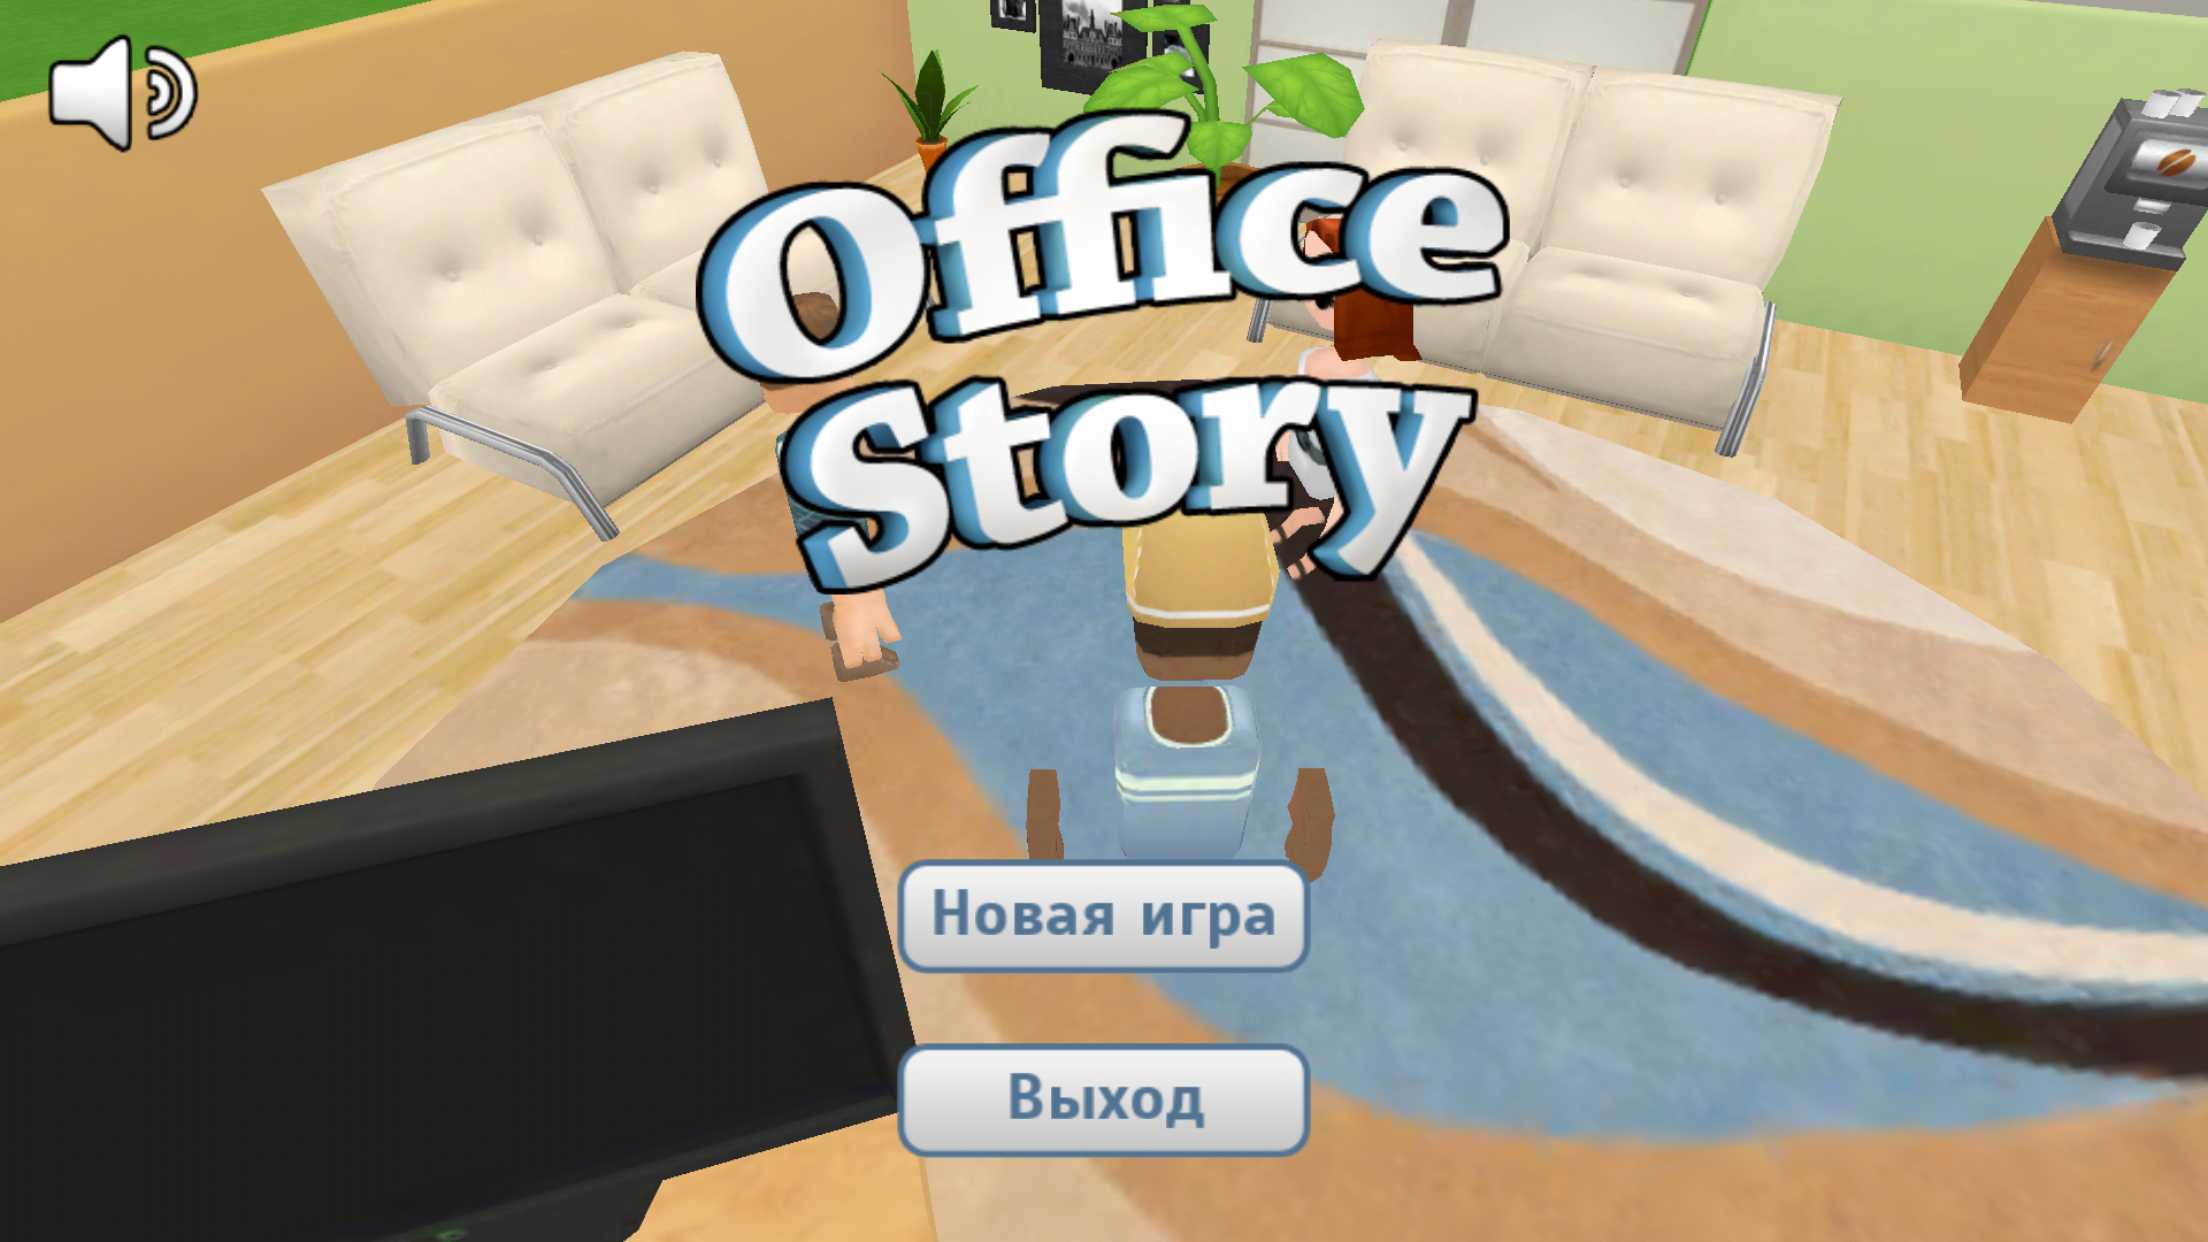 Игра Office story. Андроид Office story. Continue the story game. IOS Hack. That new story